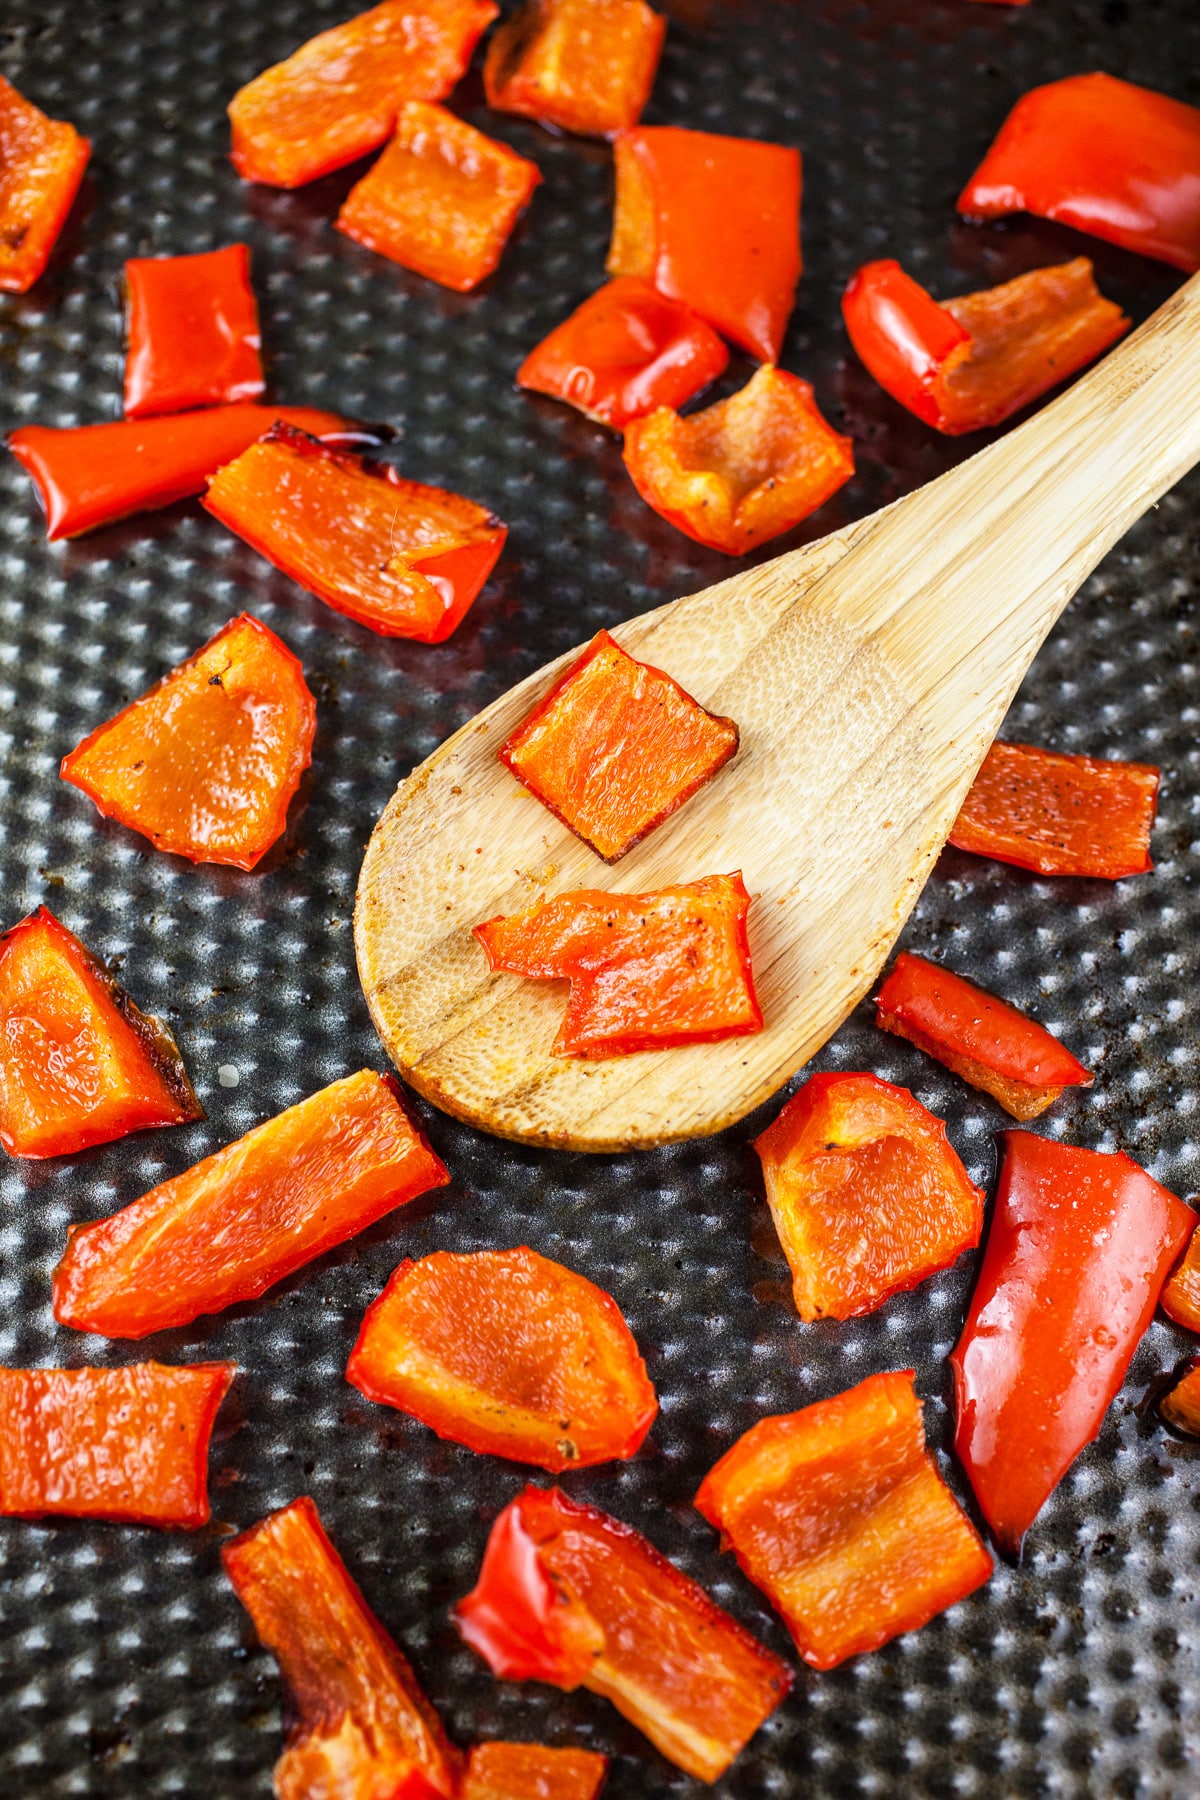 Roasted red bell peppers with wooden spoon on baking sheet.